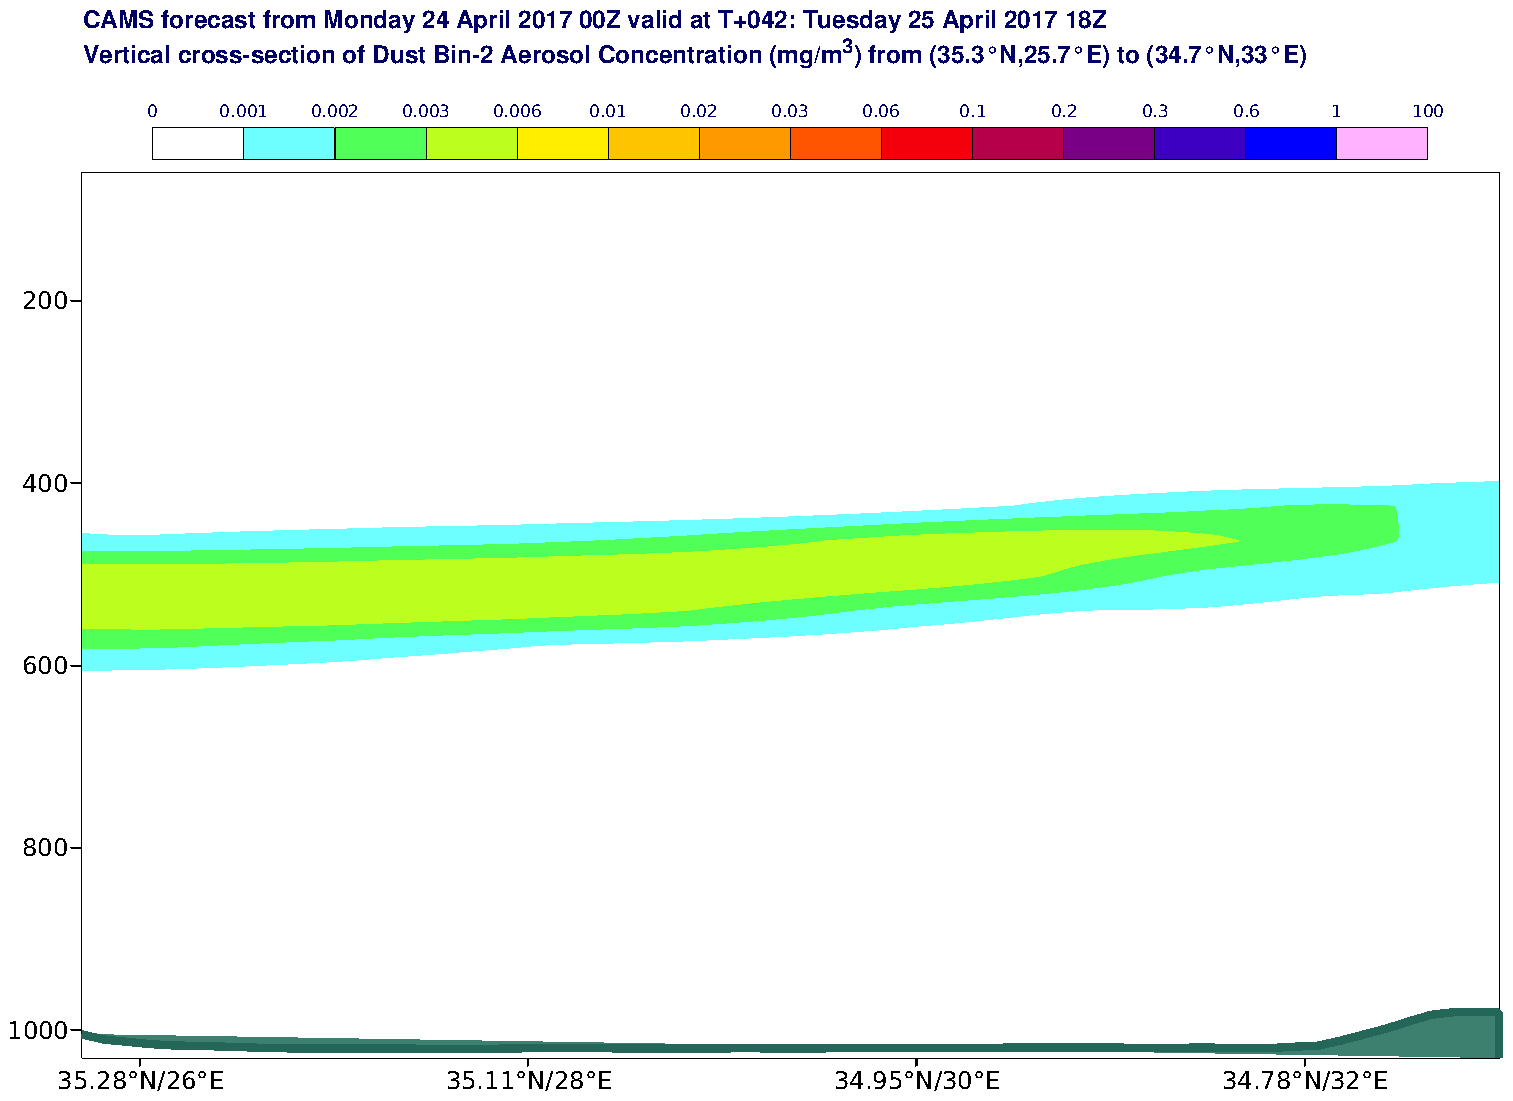 Vertical cross-section of Dust Bin-2 Aerosol Concentration (mg/m3) valid at T42 - 2017-04-25 18:00